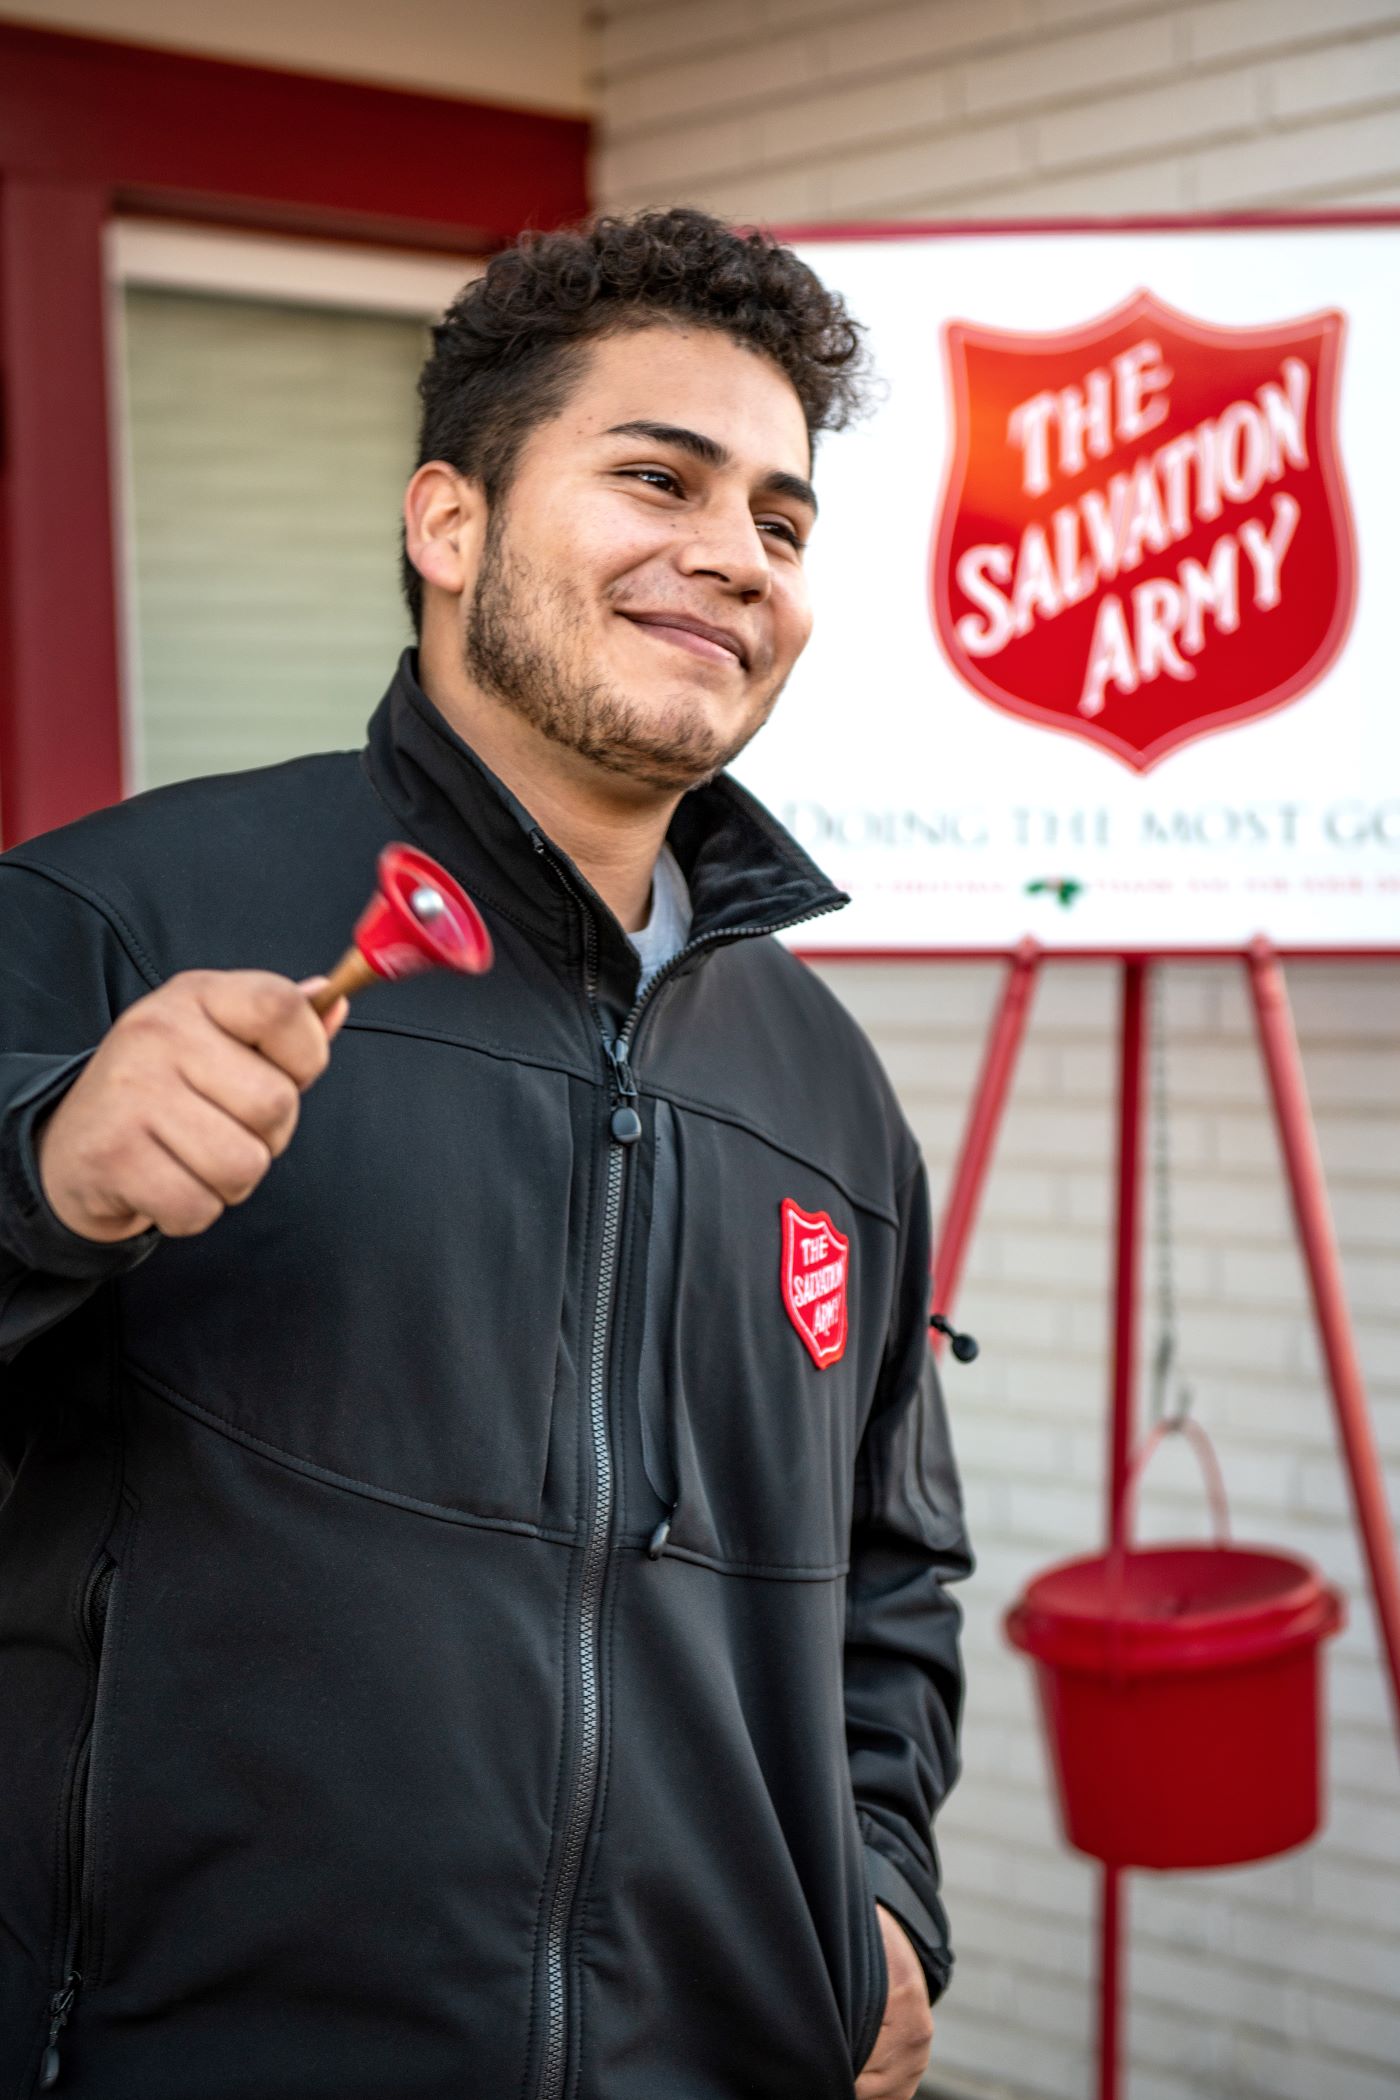 An image of a Salvation Army volunteer.